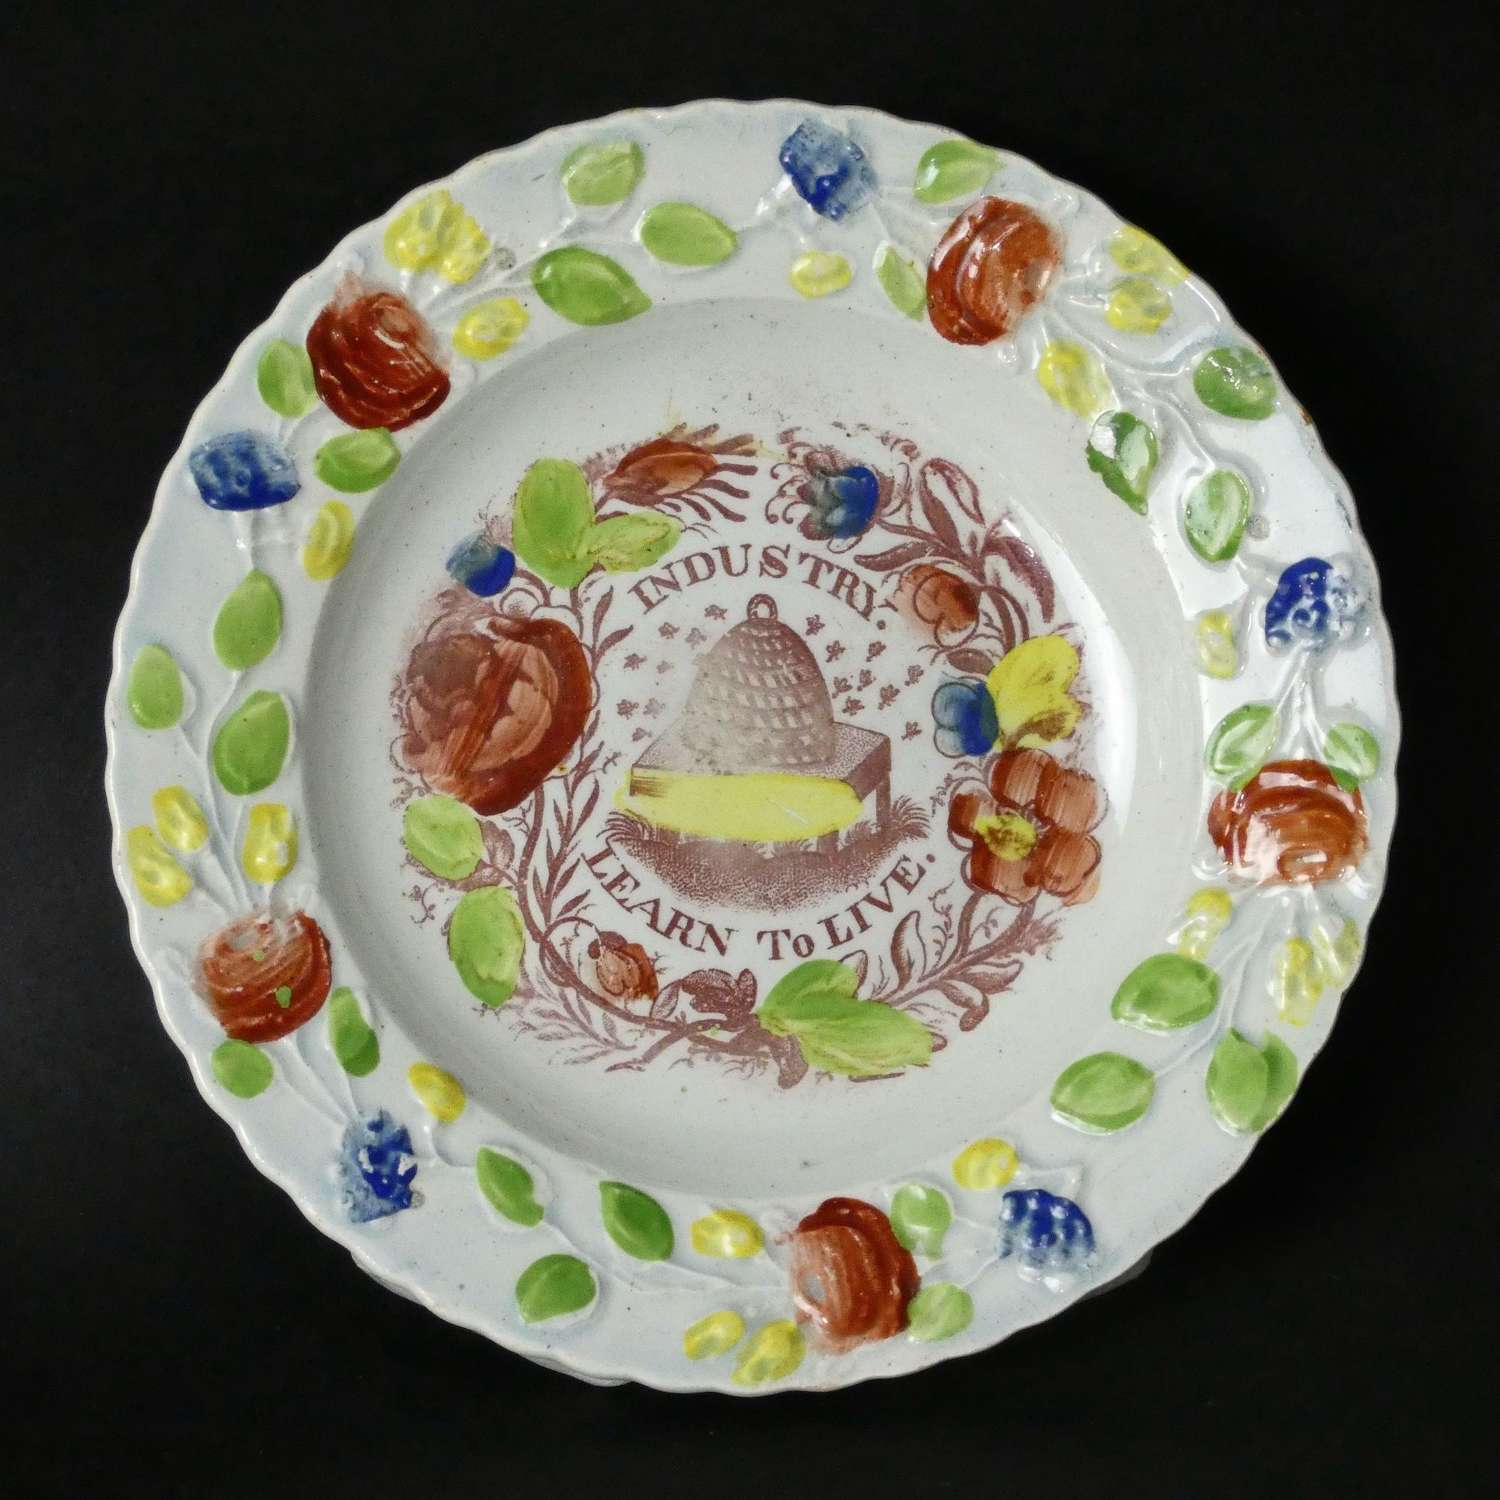 Child's plate printed with 